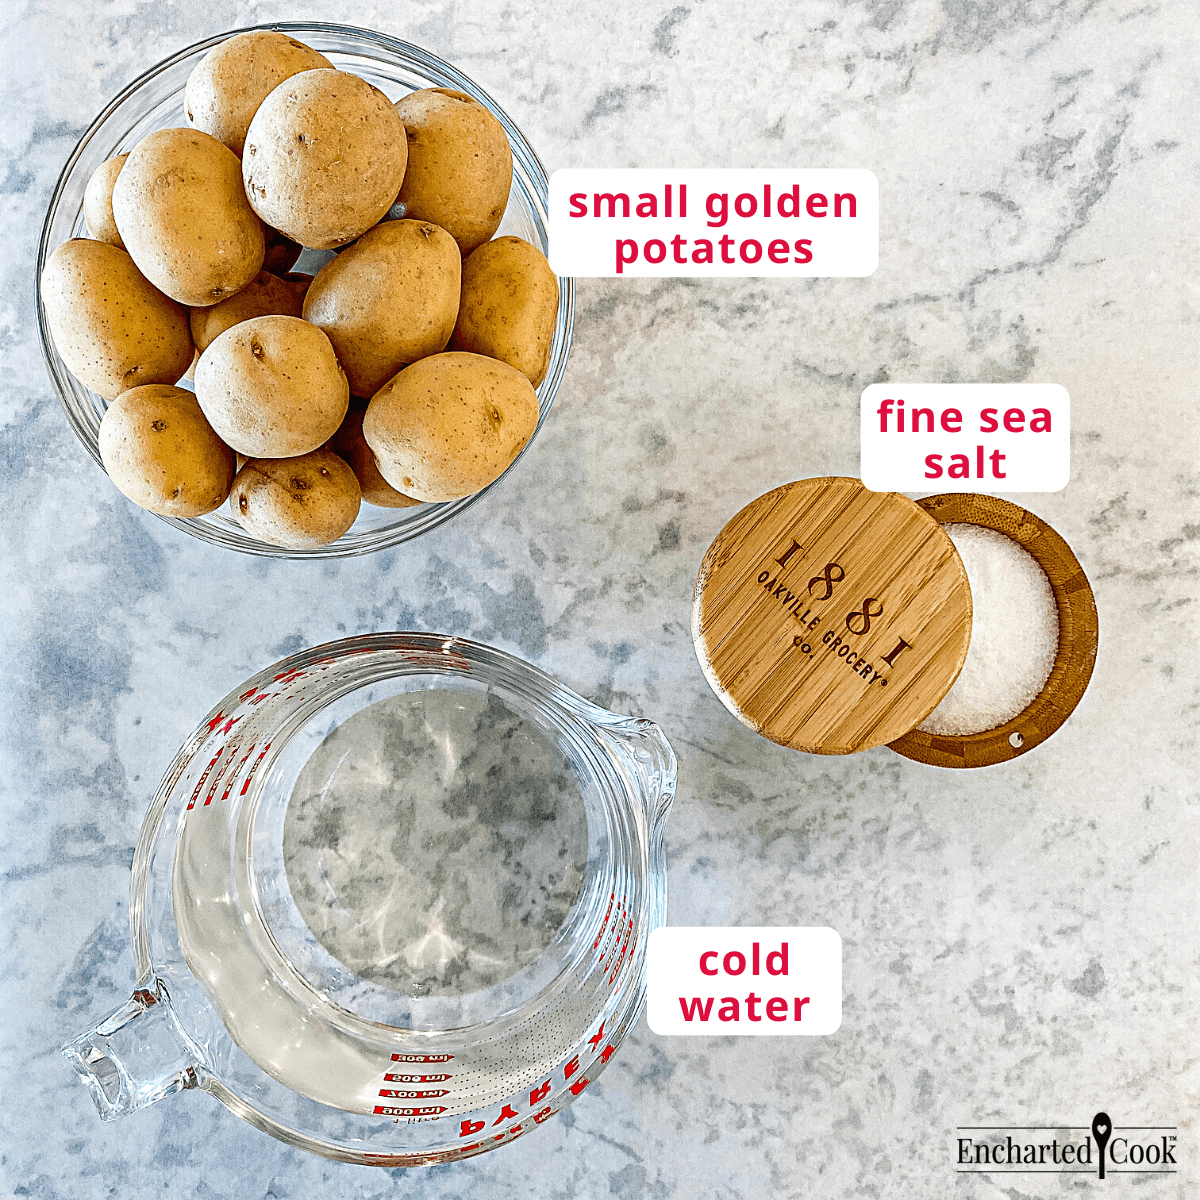 The ingredients, labeled, from top: small golden potatoes, fine sea salt, and cold water.